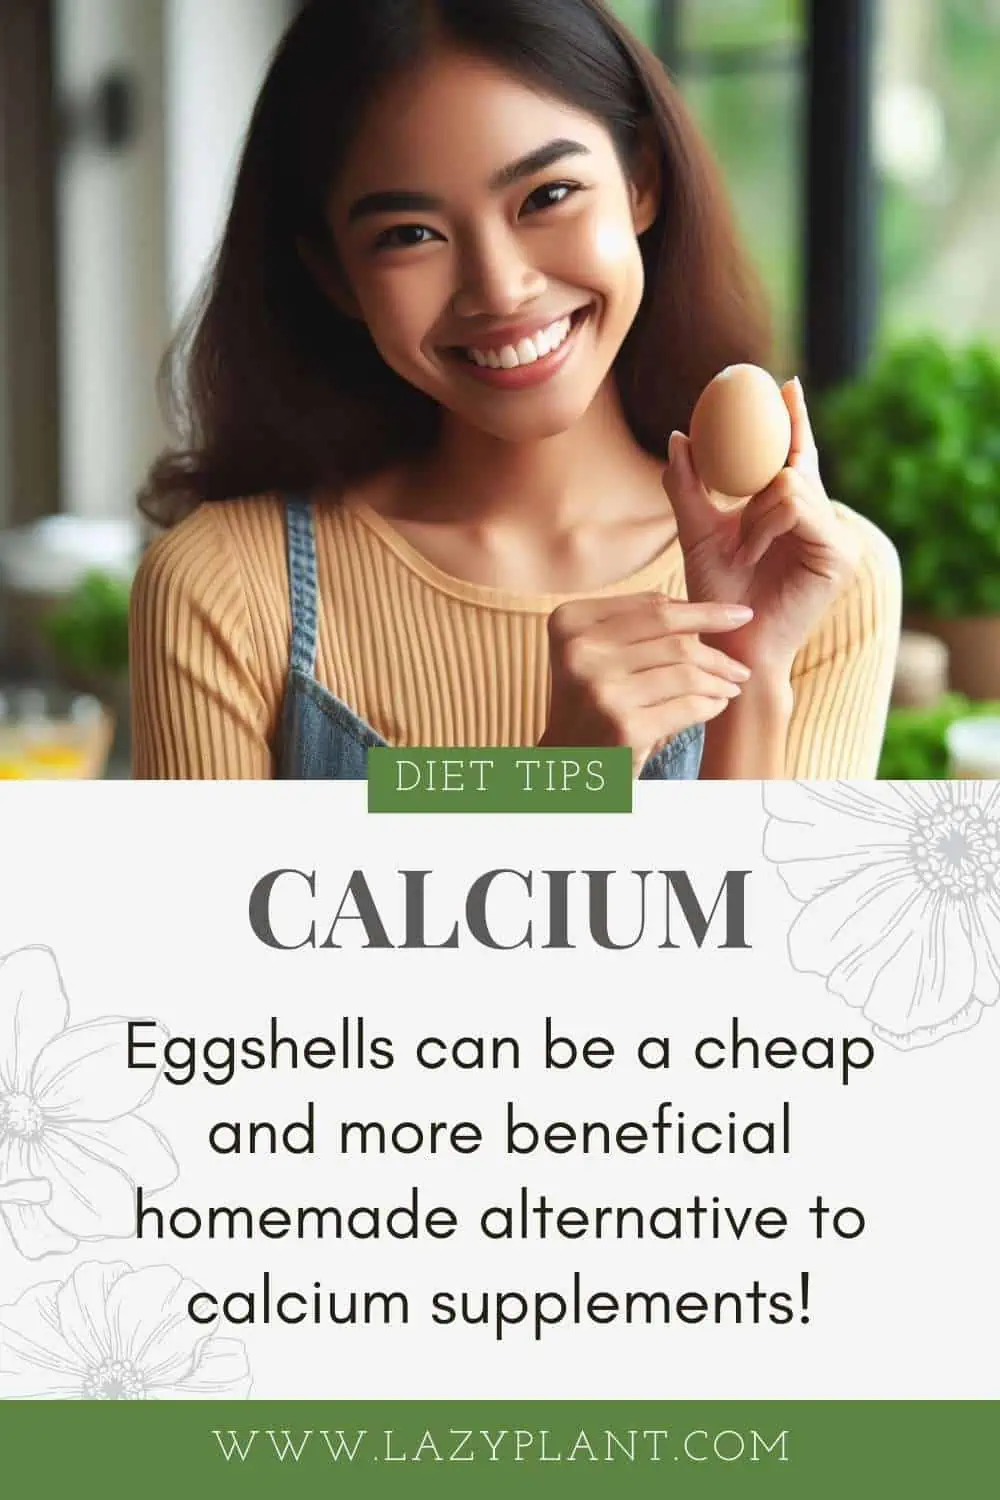 How much Calcium is in an Egg?